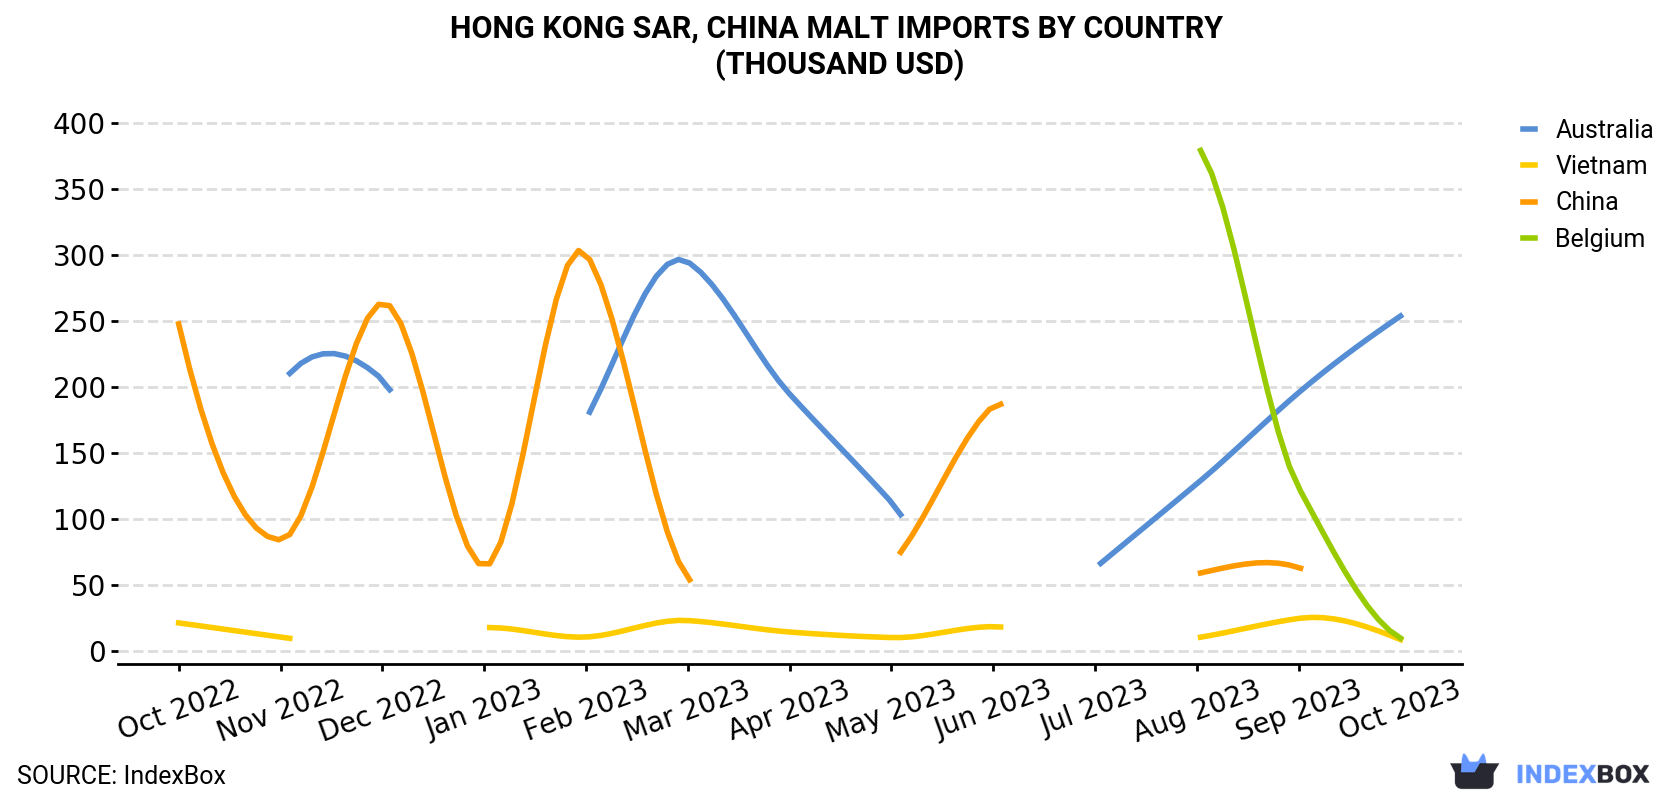 Hong Kong Malt Imports By Country (Thousand USD)